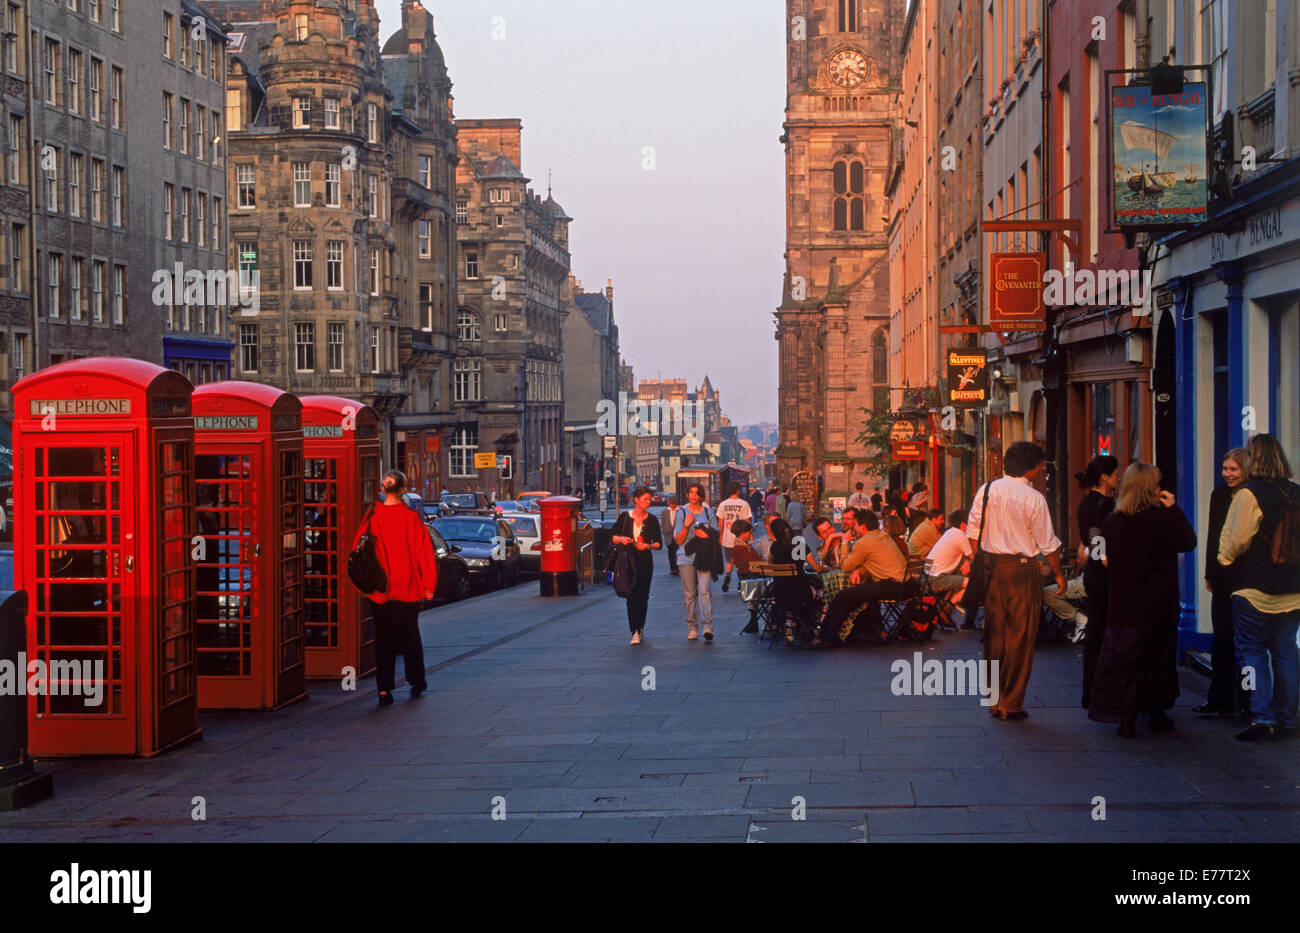 Telephone booths, pedestrians and pubs along The Royal Mile in Edinburgh in sunset light Stock Photo